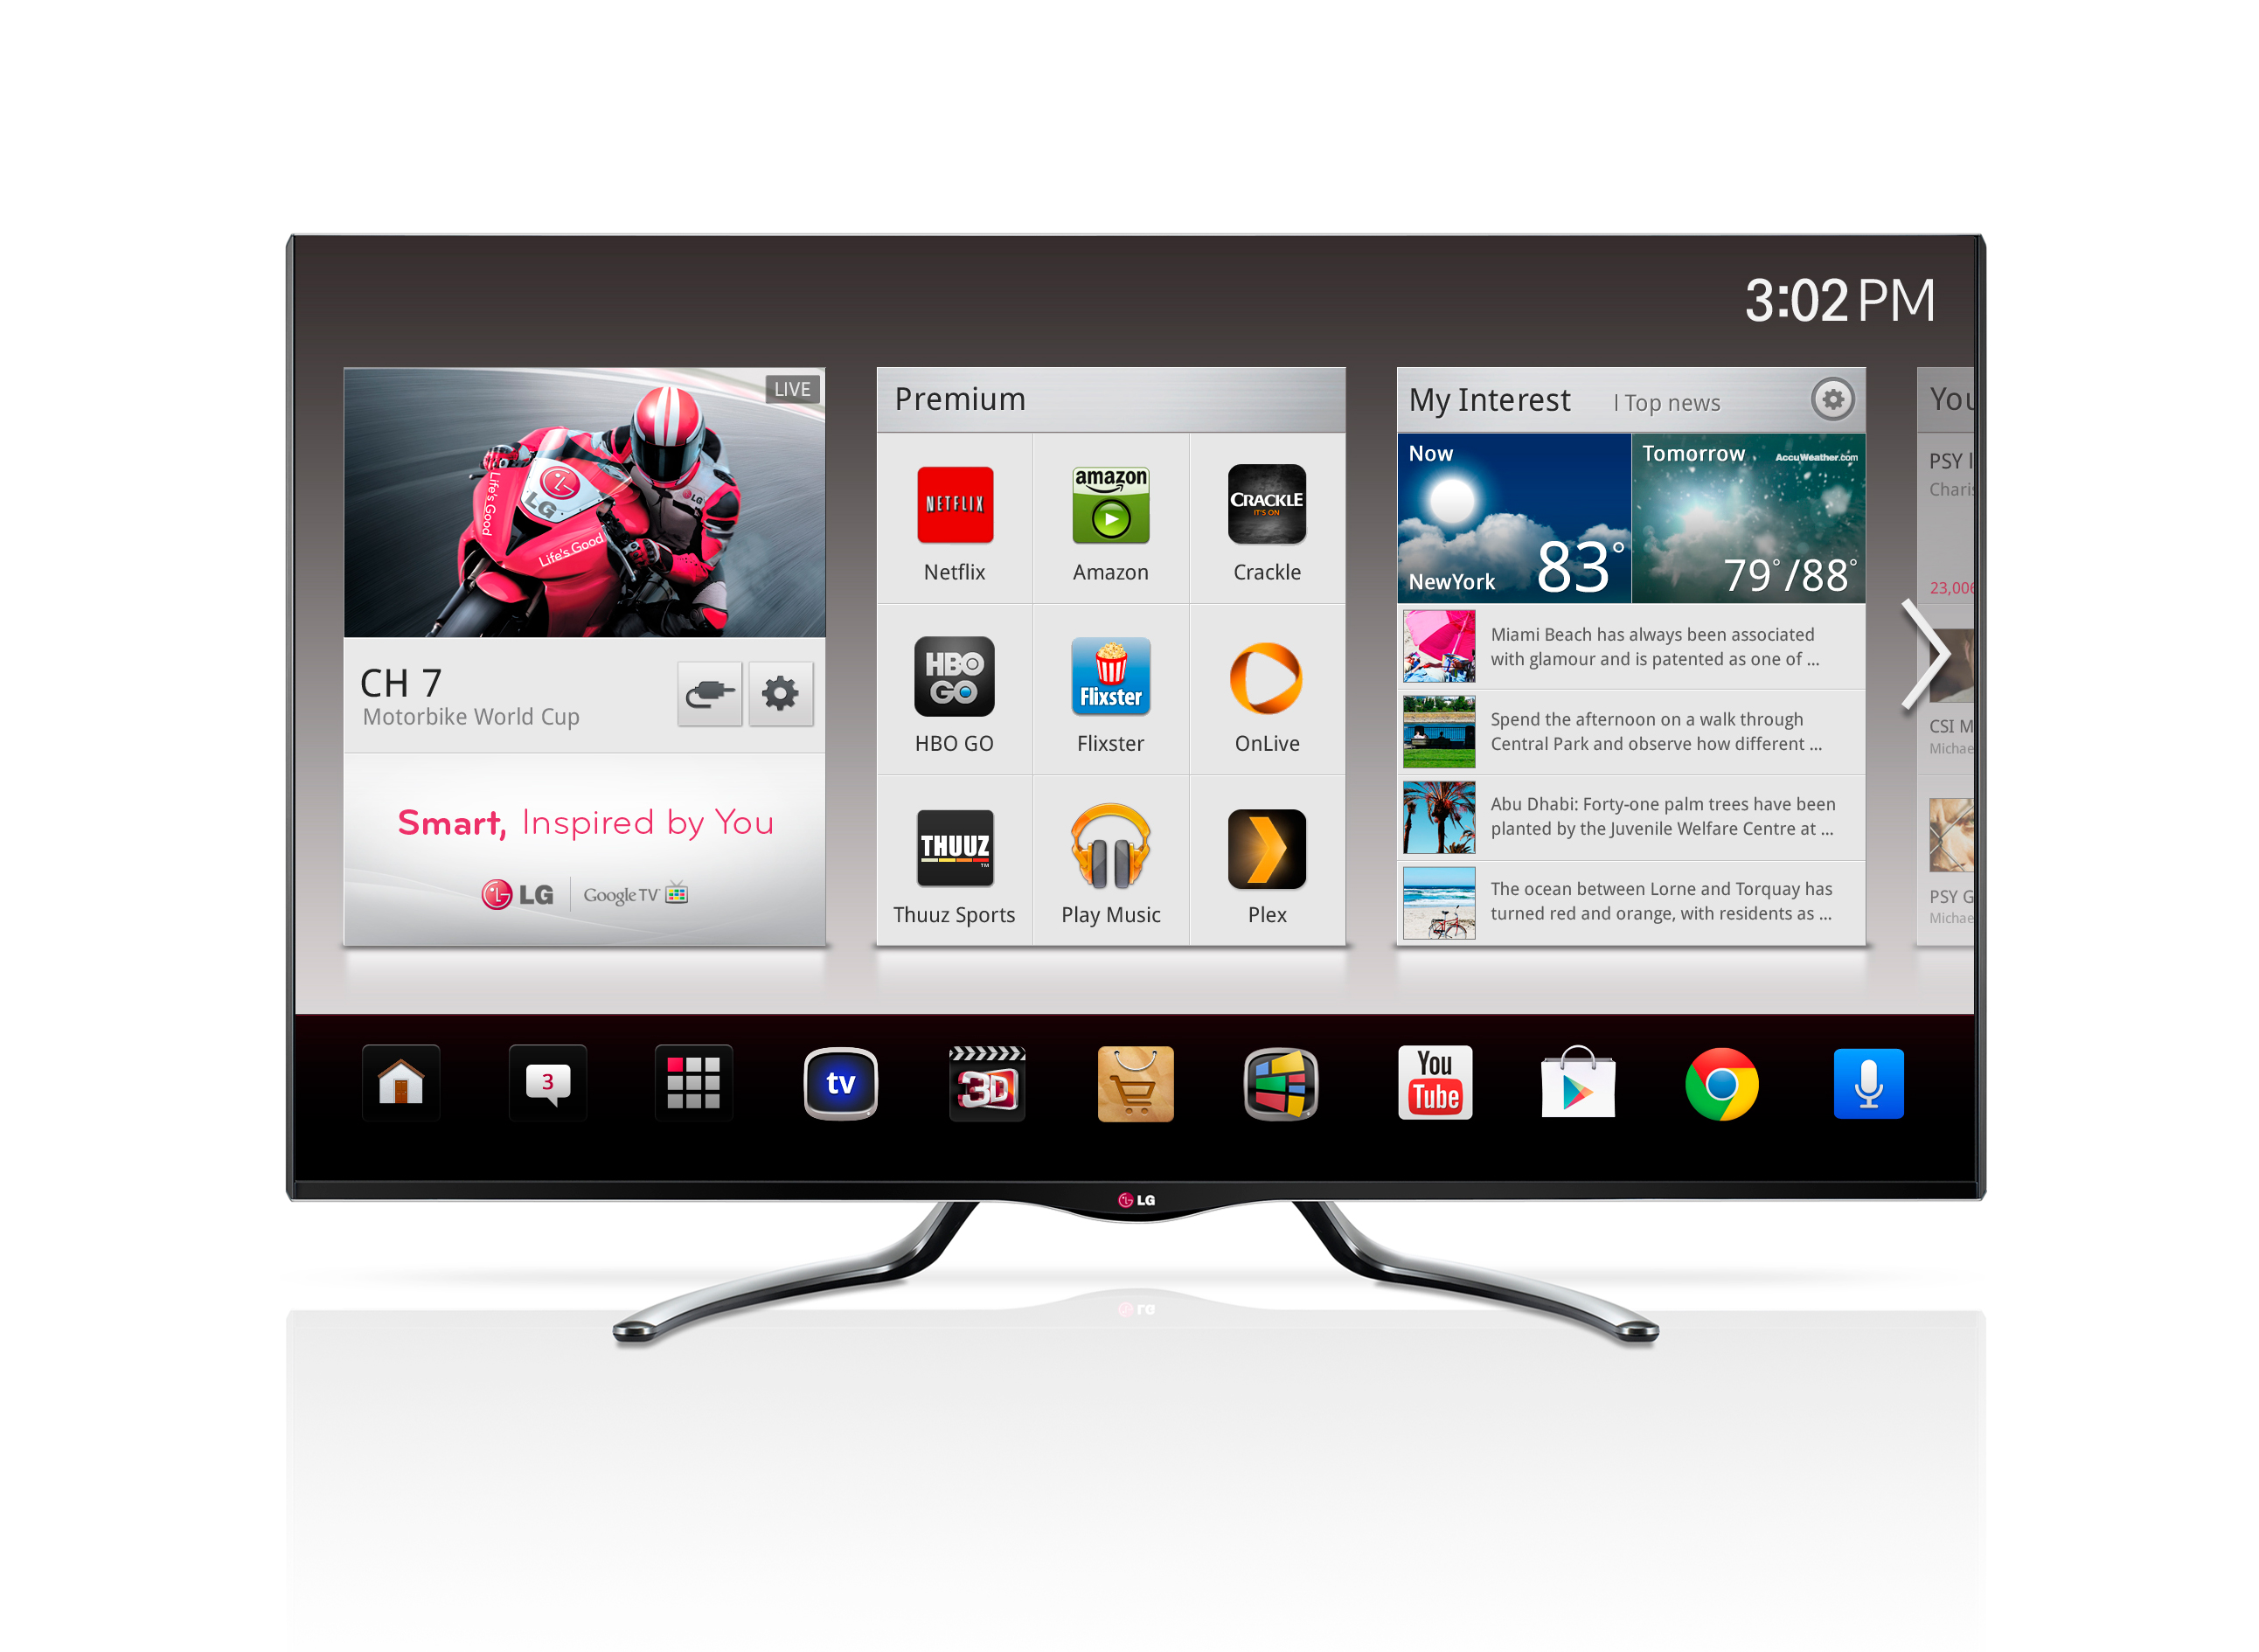 Applications supported by Android 4.2.2 Jelly Bean Operating System demonstrated on the LG Google TV